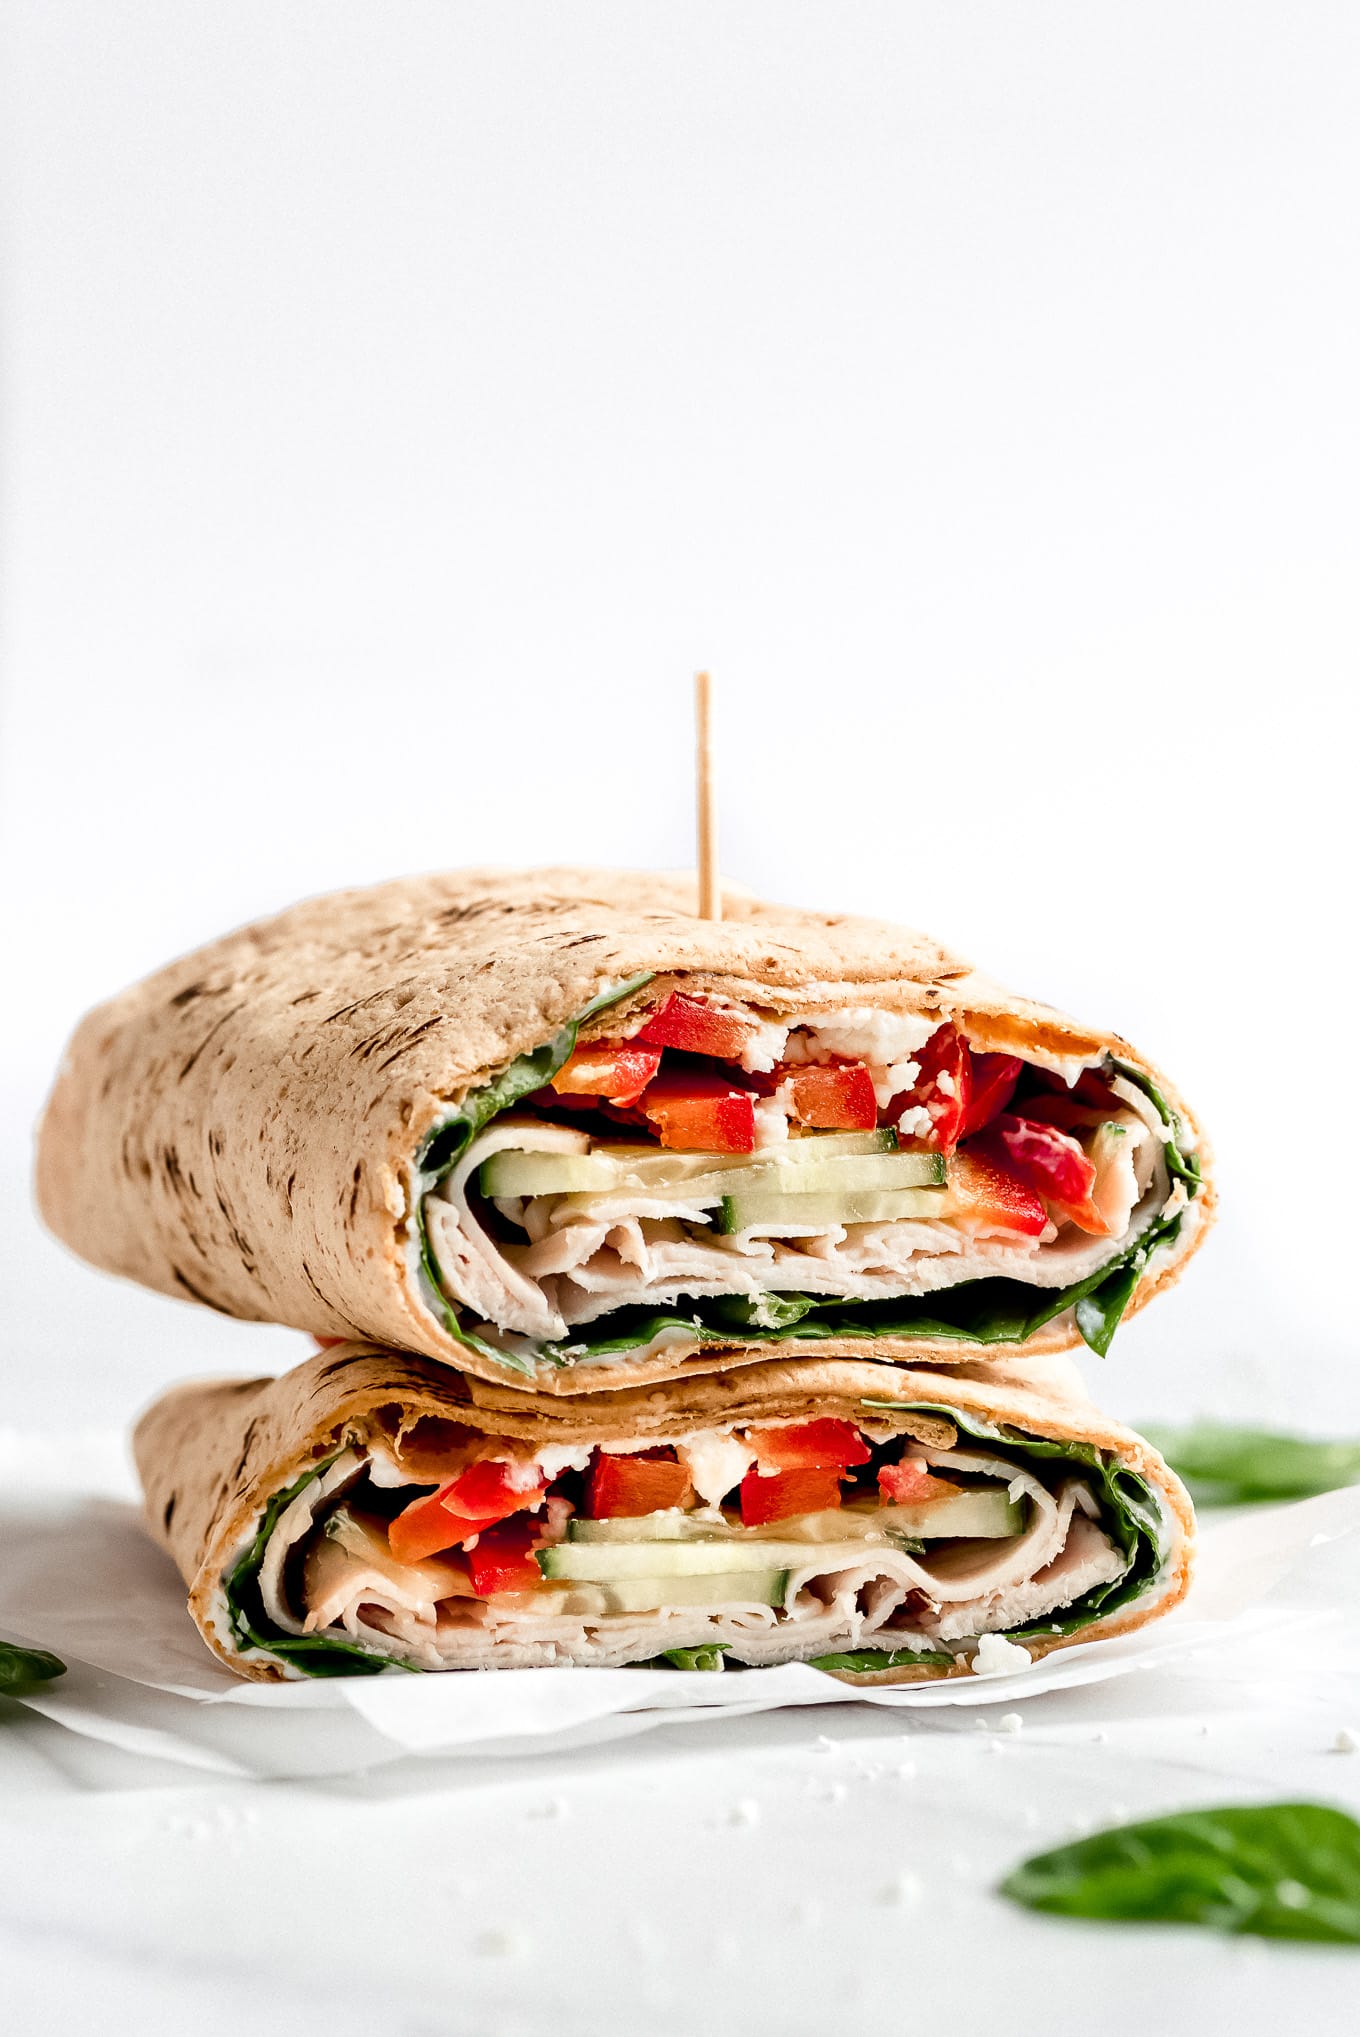 Two halves of a Turkey Ranch Wrap are stacked on top of each other showing the inside full of veggies, turkey, and a Greek yogurt ranch sauce.